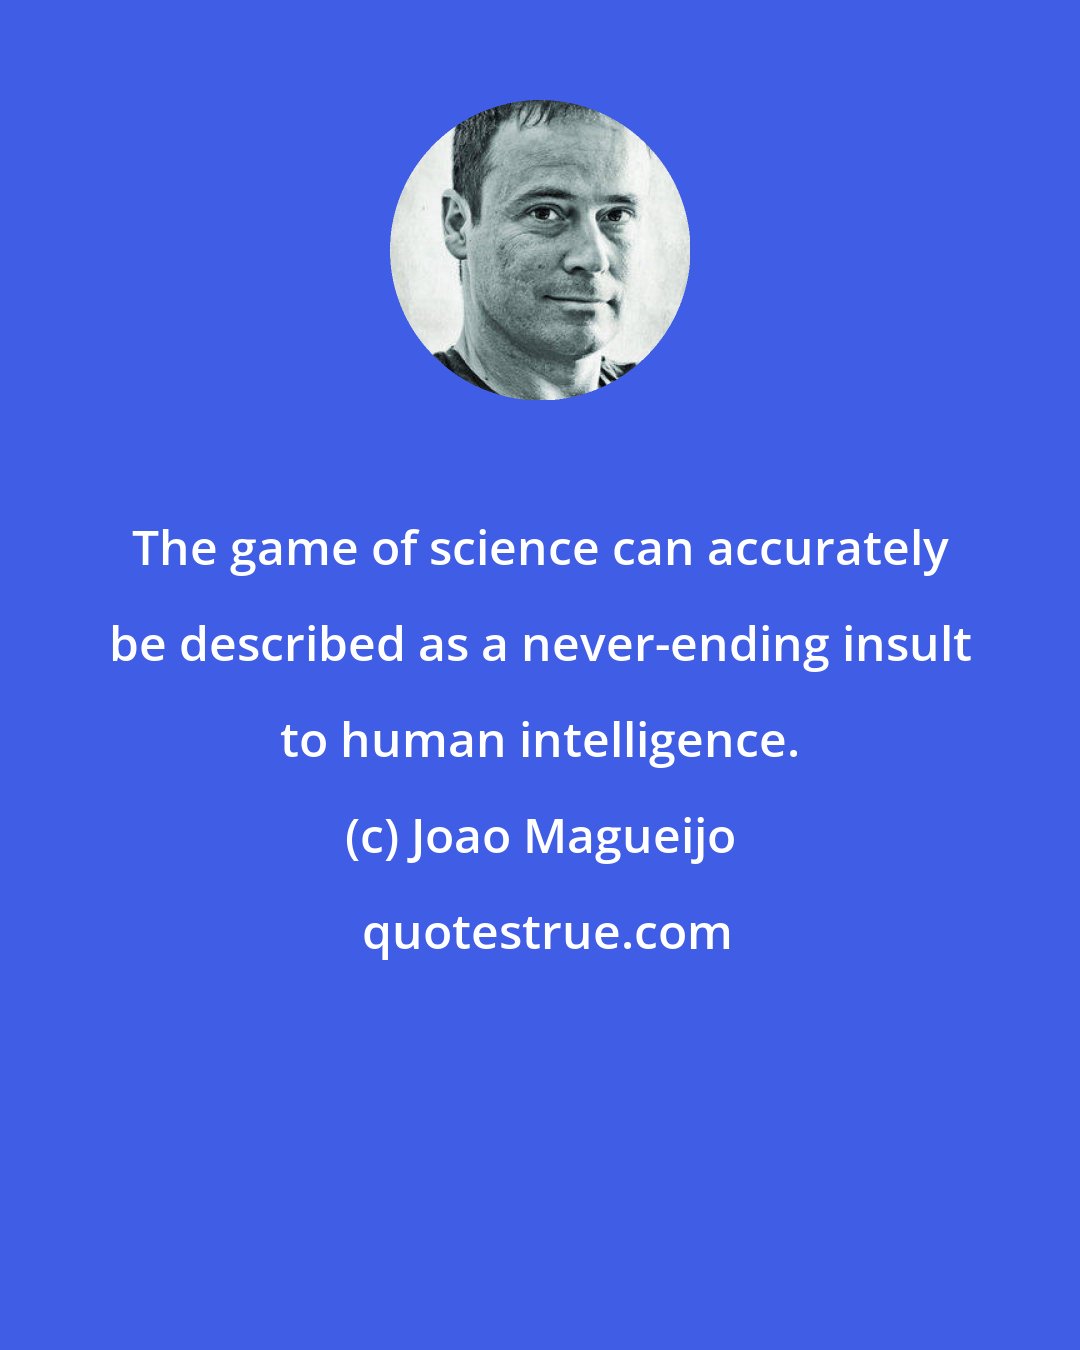 Joao Magueijo: The game of science can accurately be described as a never-ending insult to human intelligence.